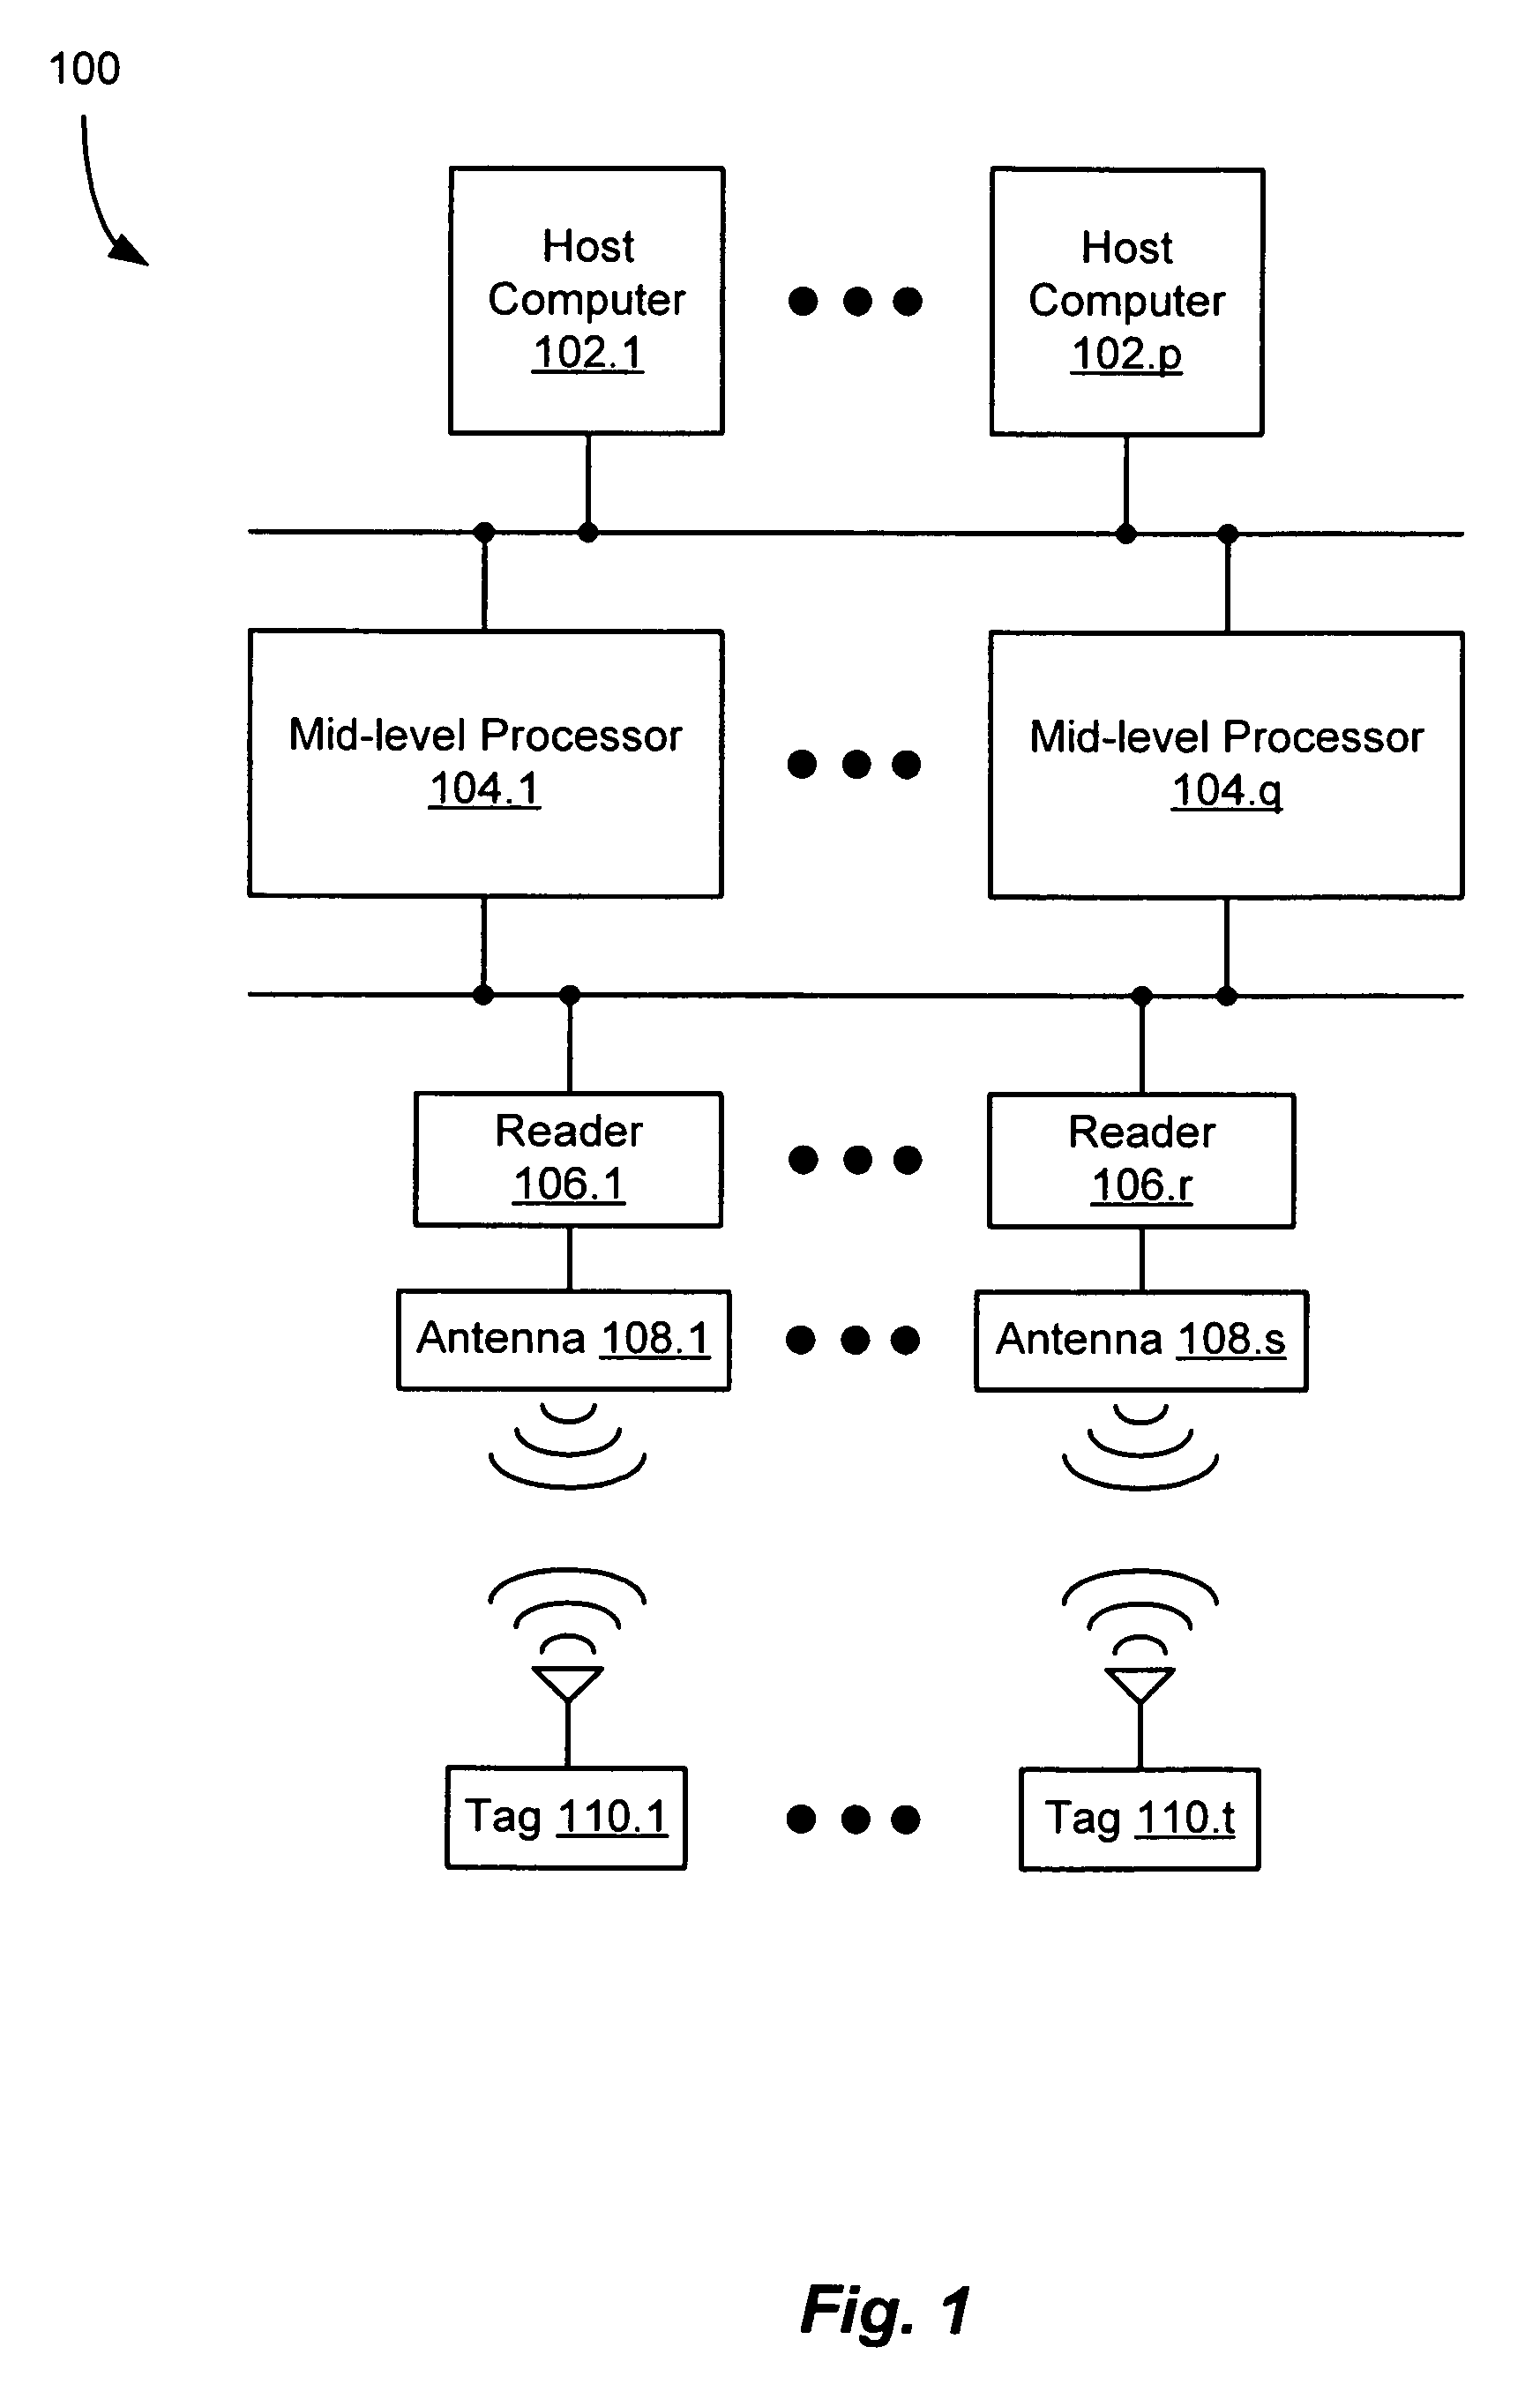 Configuration management system and method for use in an RFID system including a multiplicity of RFID readers